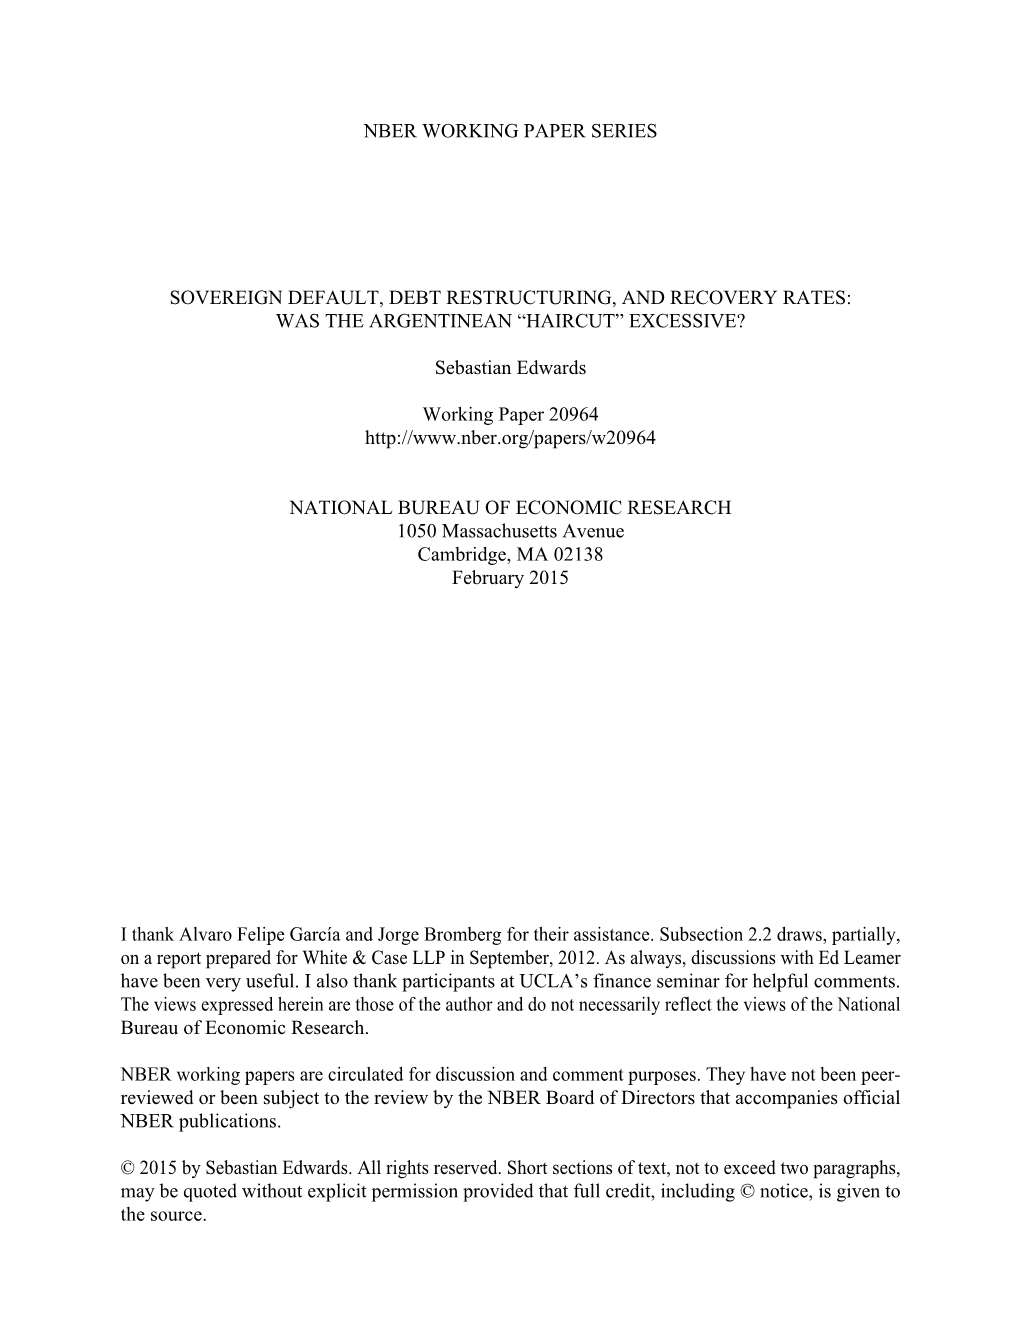 Nber Working Paper Series Sovereign Default, Debt Restructuring, and Recovery Rates: Was the Argentinean “Haircut” Excessive